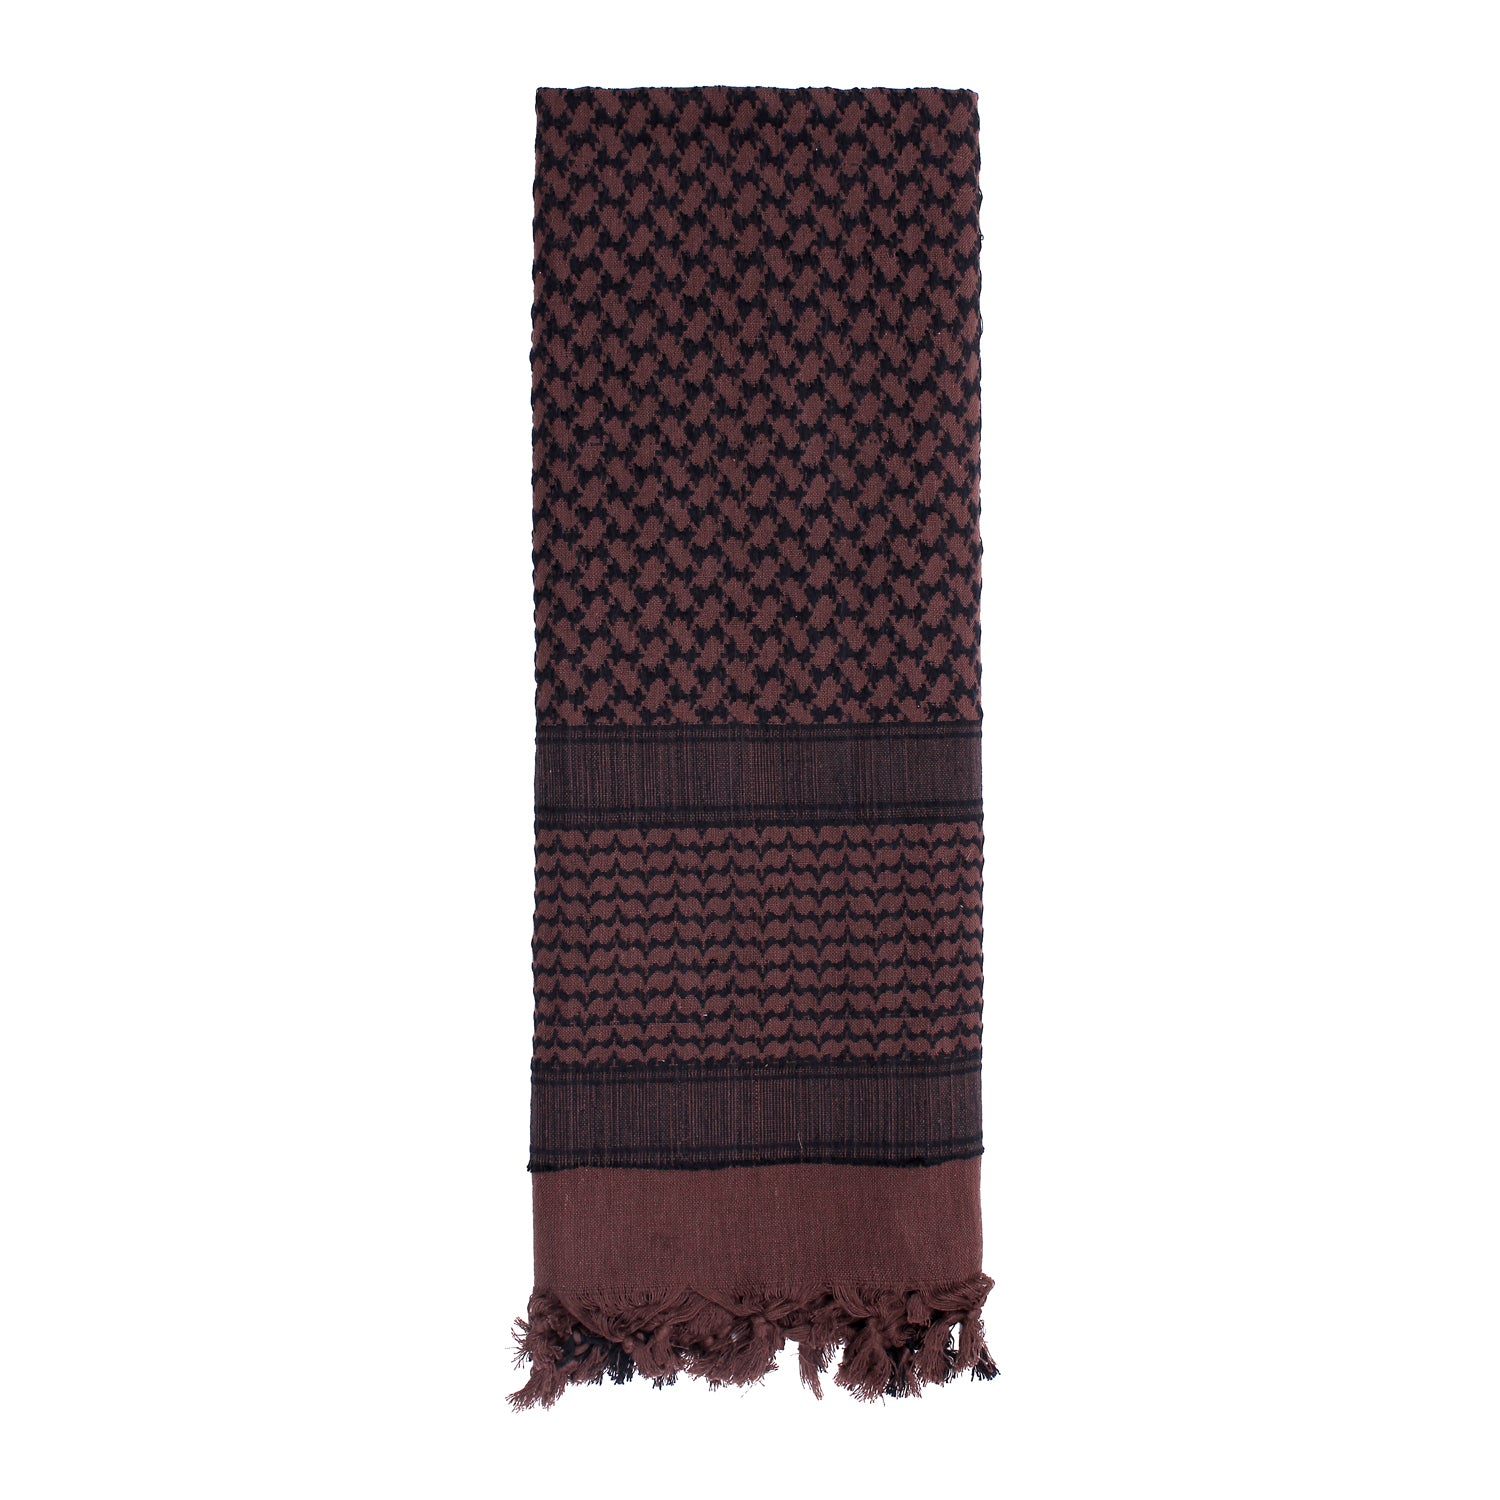 Large Shemagh Tactical Desert Scarf - 42 inches by 42 inches